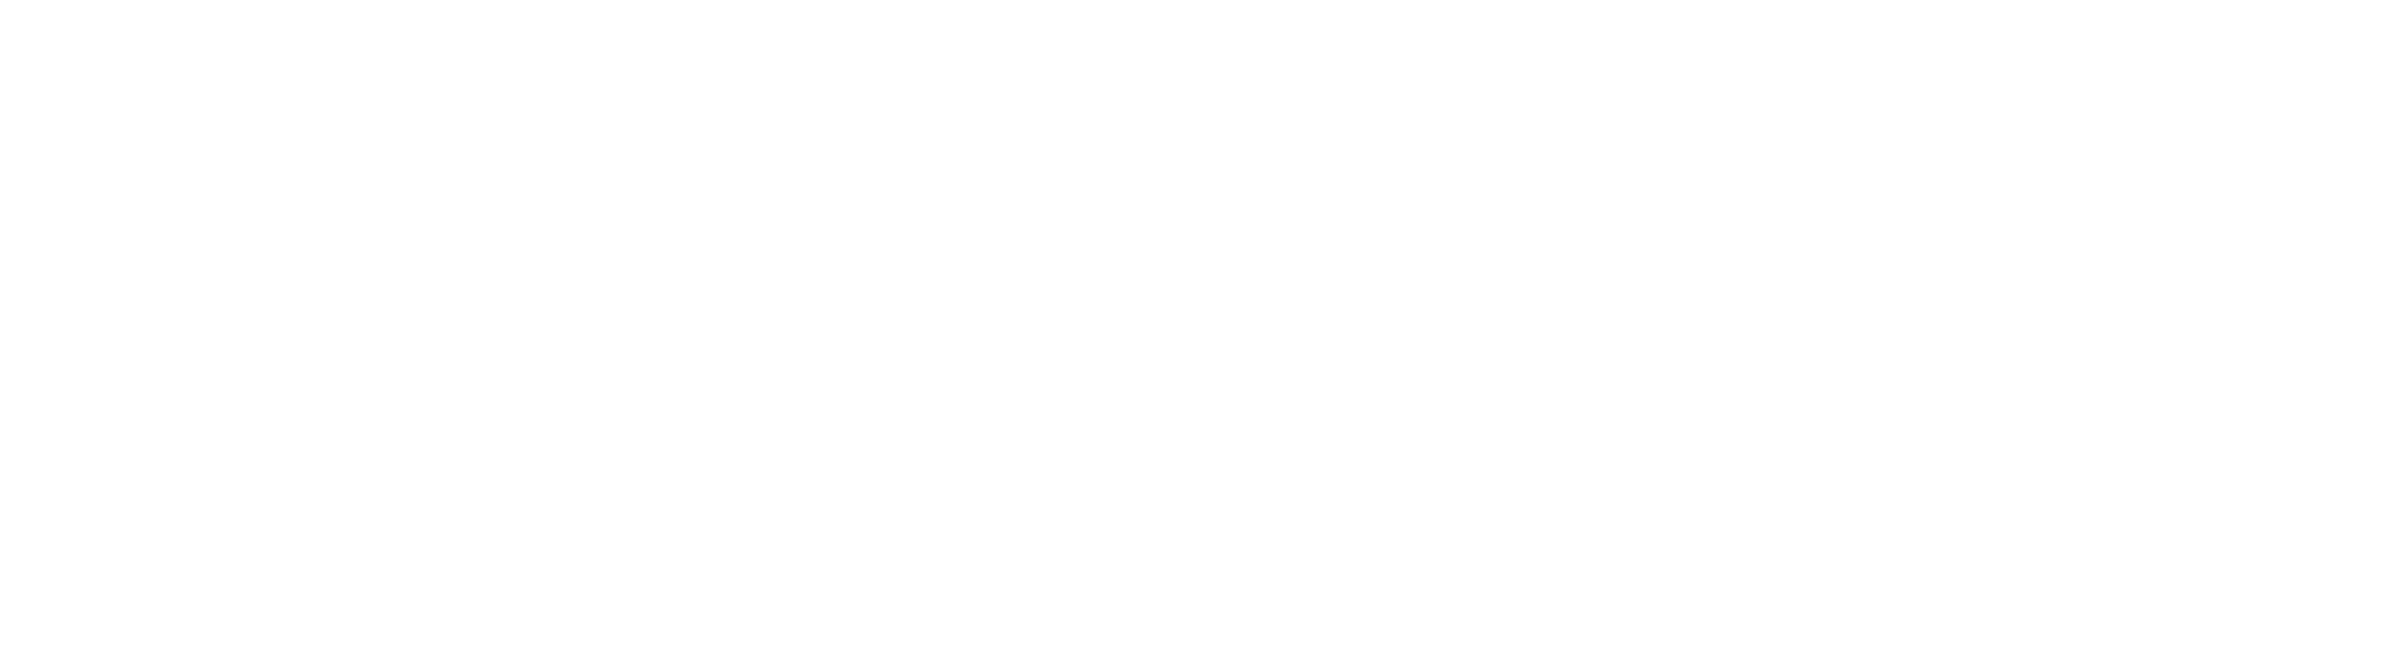 Trying hard is an ability.夢を描いて、汗をかく。DAIICHI REAL ESTATE